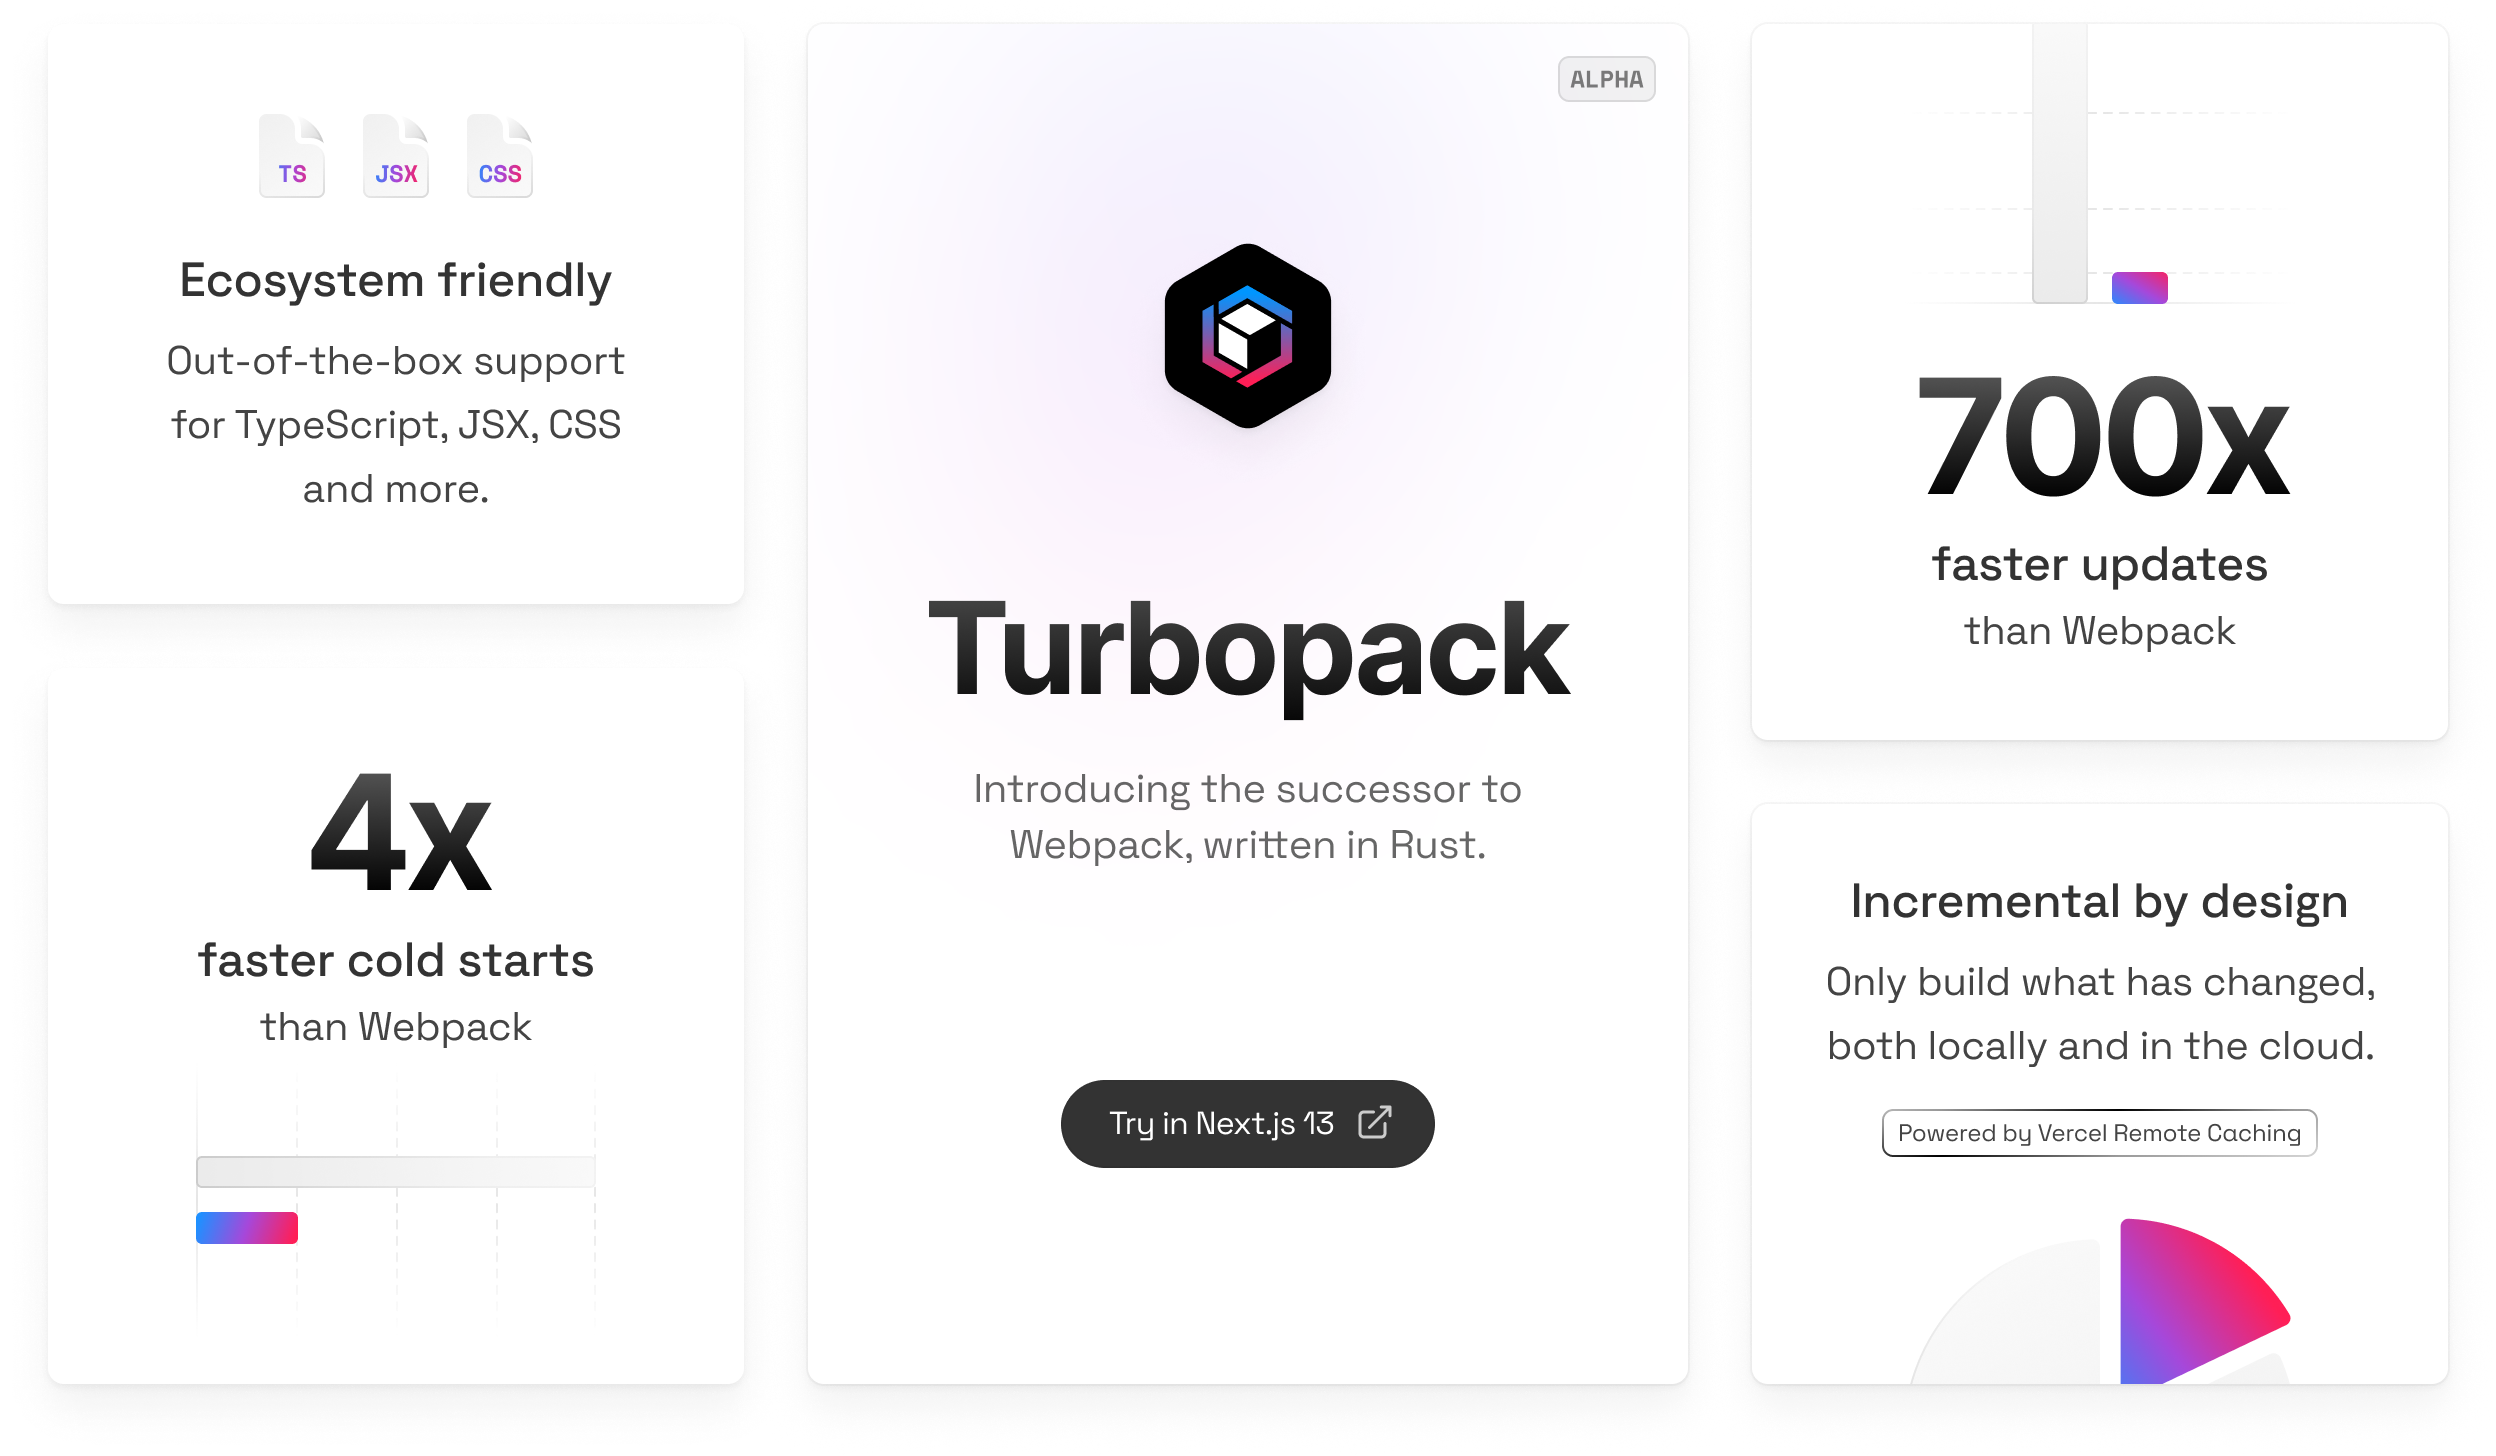 Turbopack provides a fast and flexible development experience for apps of any size.